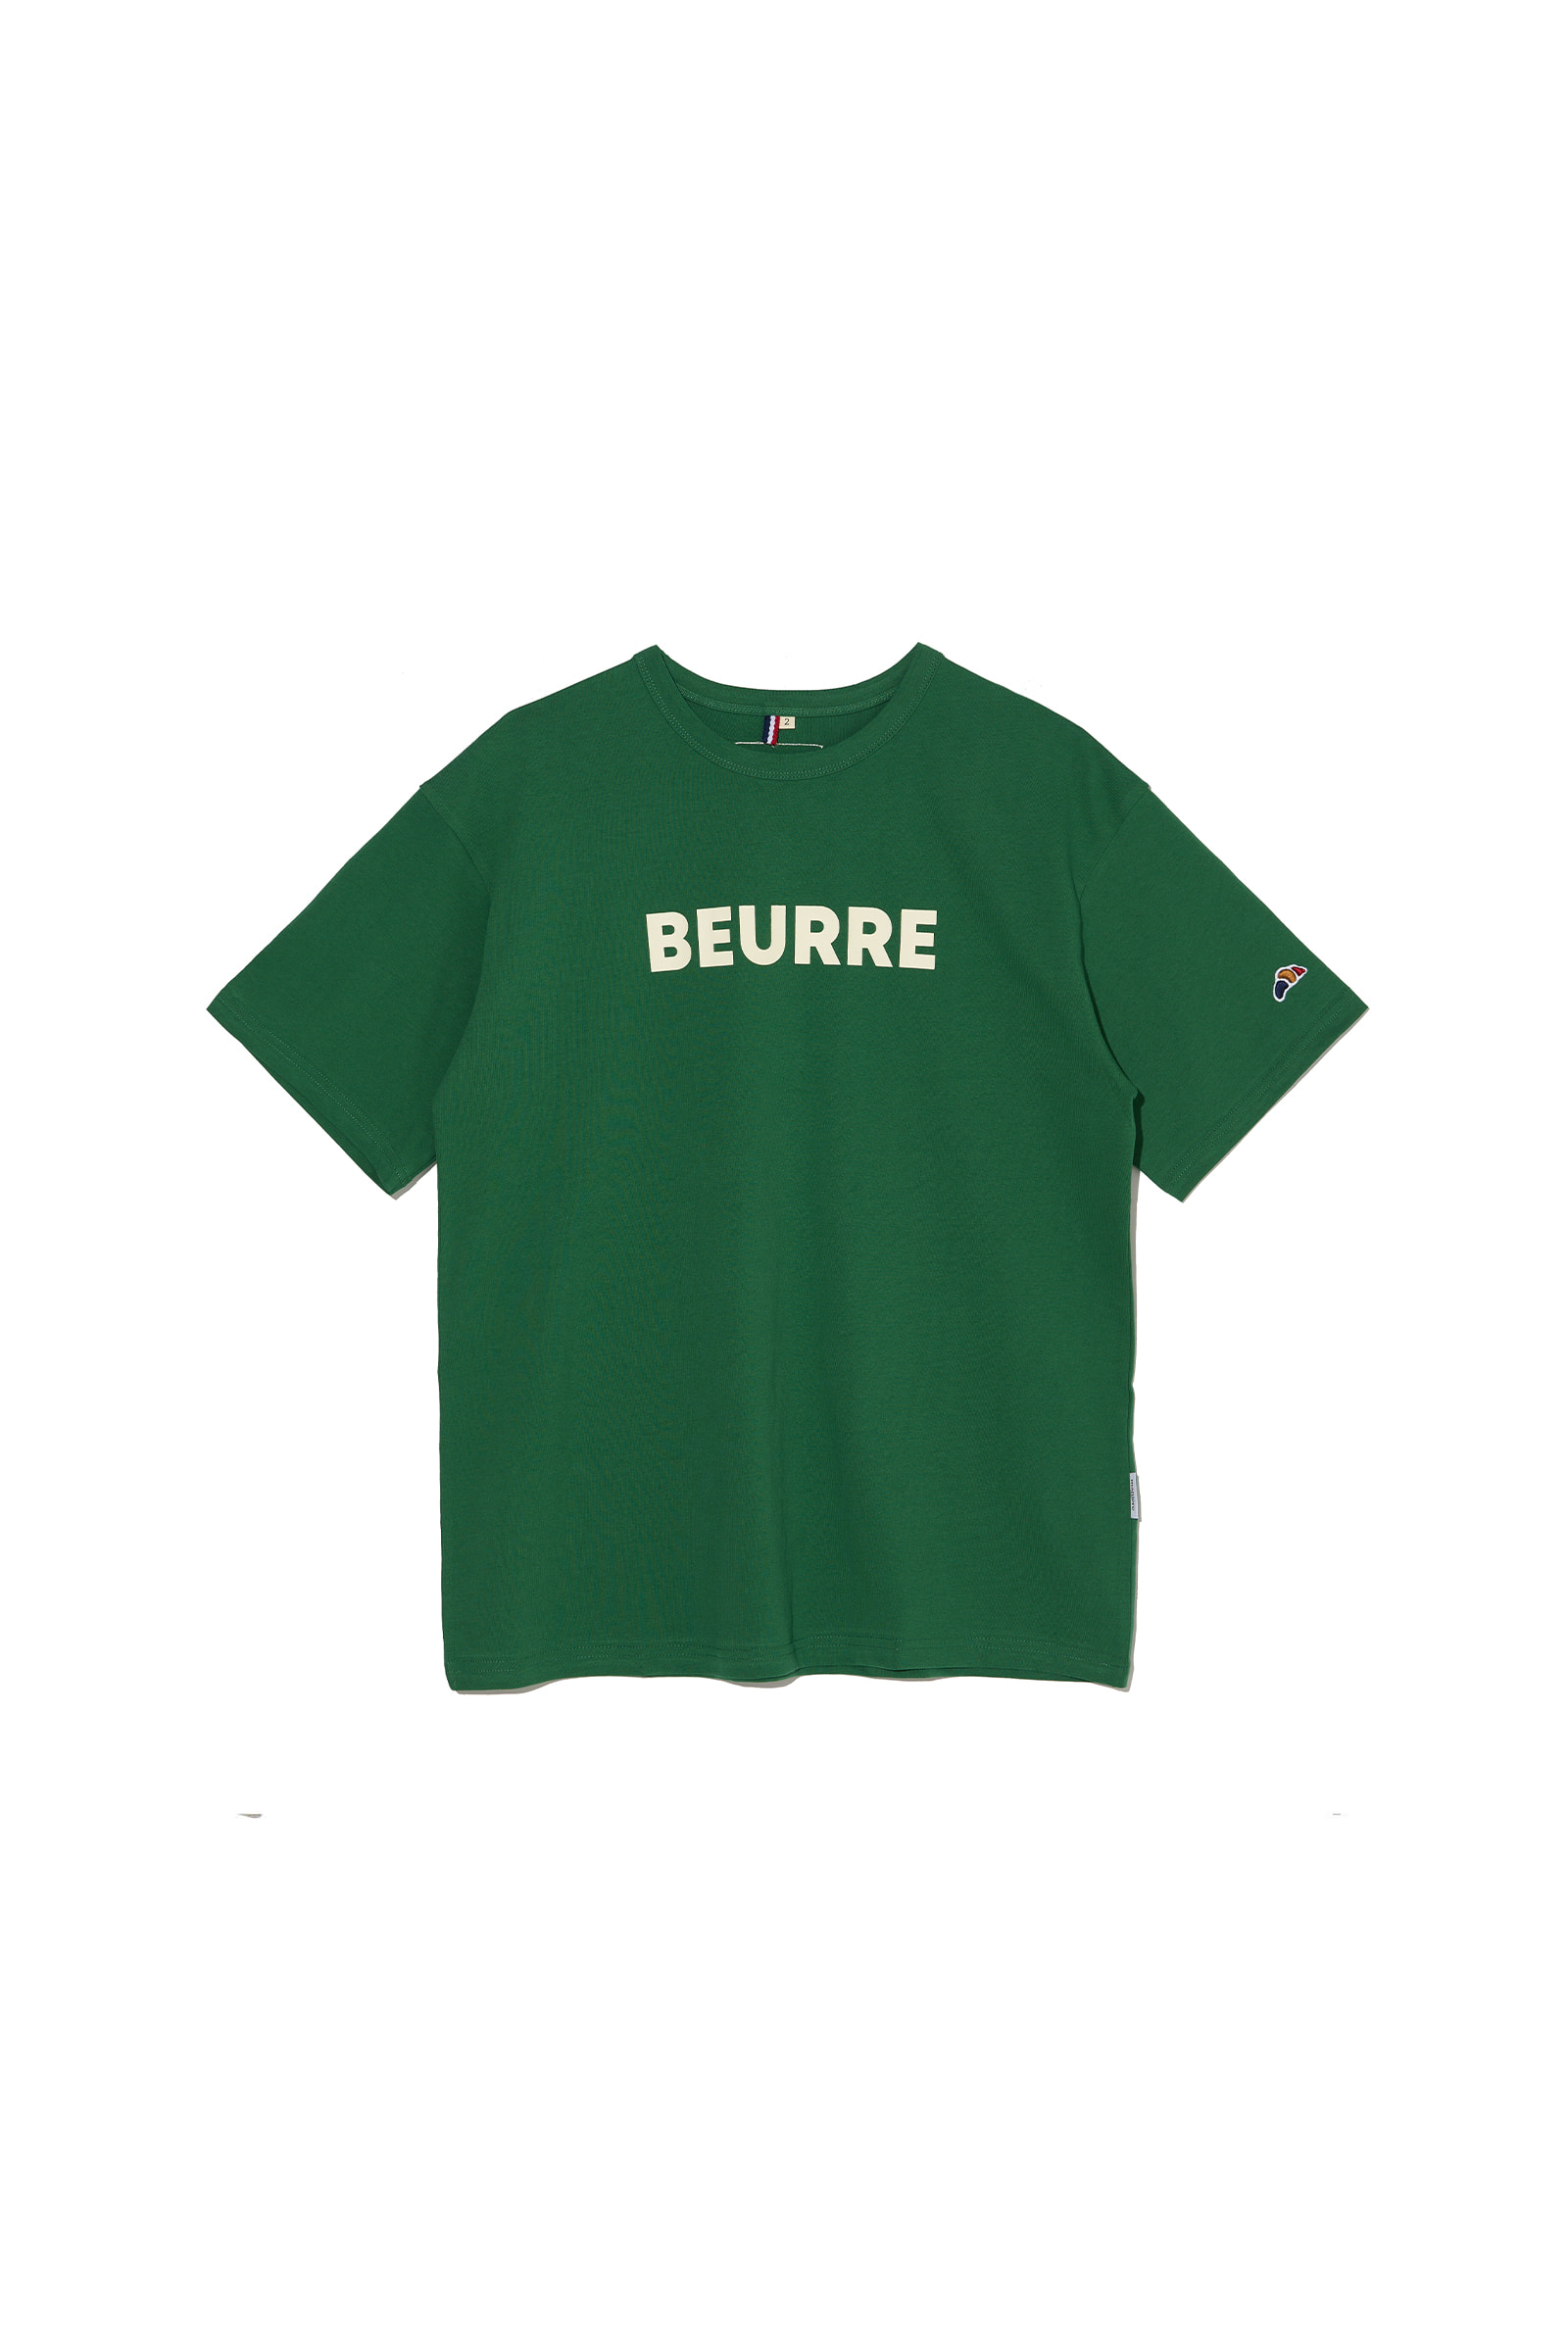 ep.6 BEURRE T-shirts (Green)